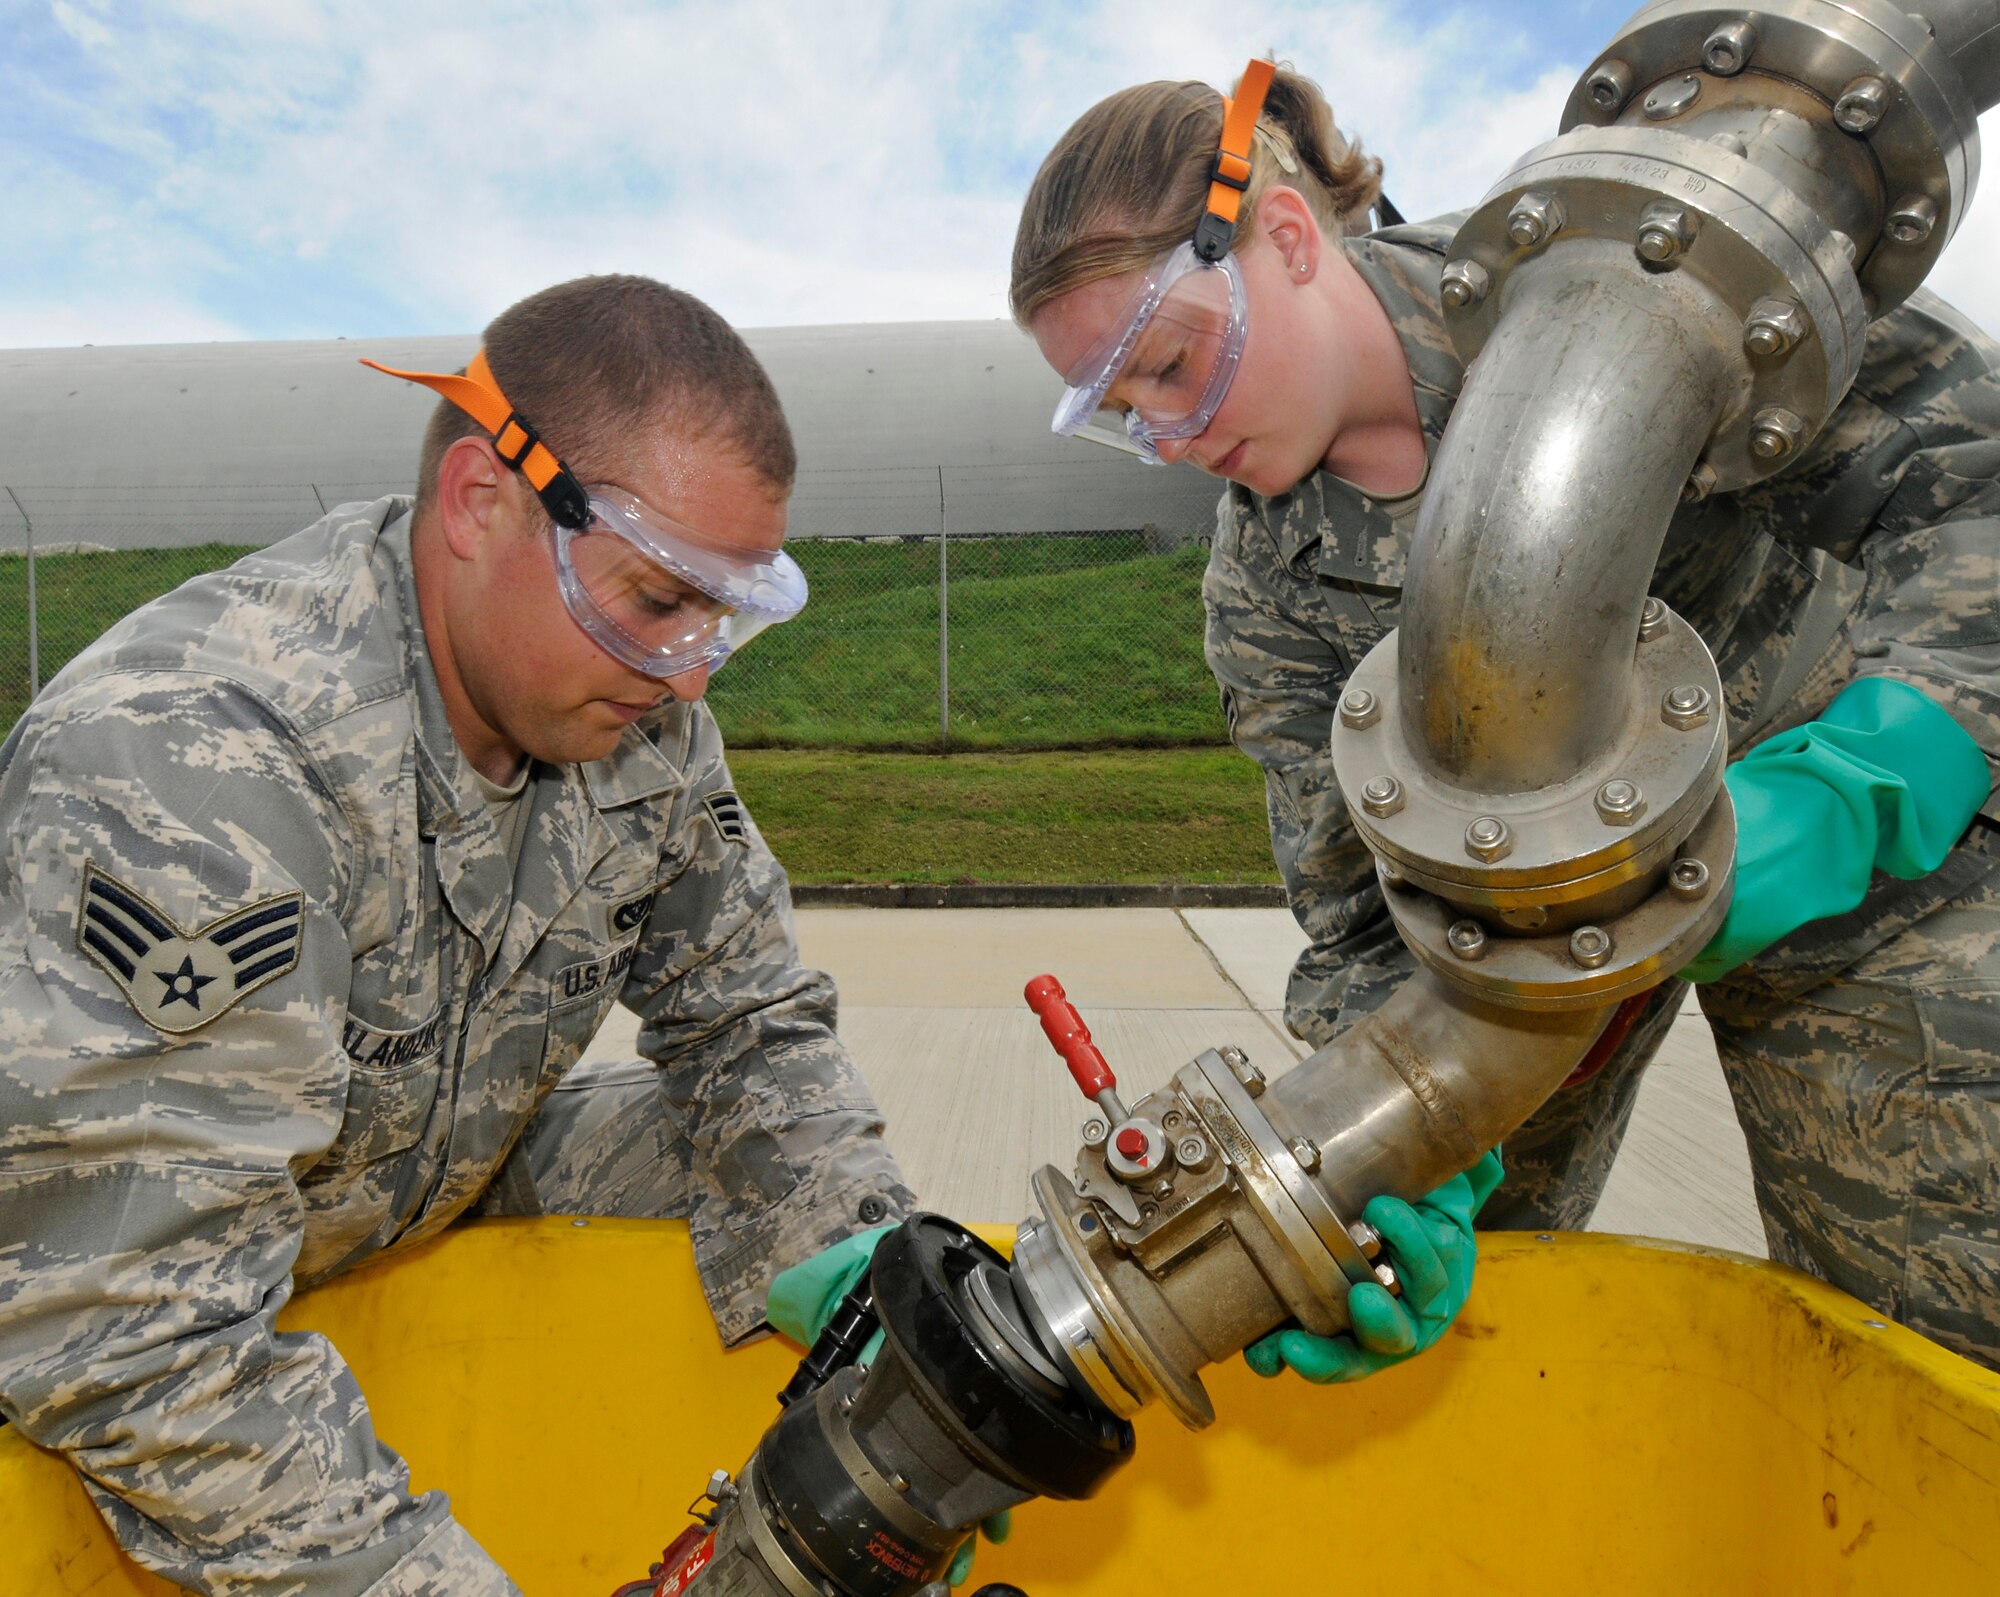 SPANGDAHLEM AIR BASE, Germany – Senior Airman Ivan Alandzak and Airman 1st Class Jennea Allen,  52nd Civil Engineer Squadron, replace a single point nozzle over a drip-pan on one of Spangdahlem Air Base’s truck refueling stands July 23. The 52nd CES Liquid Fuels Flight changes and repairs the nozzles when there is damage or a leak. The liquid fuels flight manages 2,300 meters of fuel pipeline, 23 underground fuel tanks and 8.2 million gallons of JP-8. (U.S. Air Force photo by Senior Airman Benjamin Wilson)